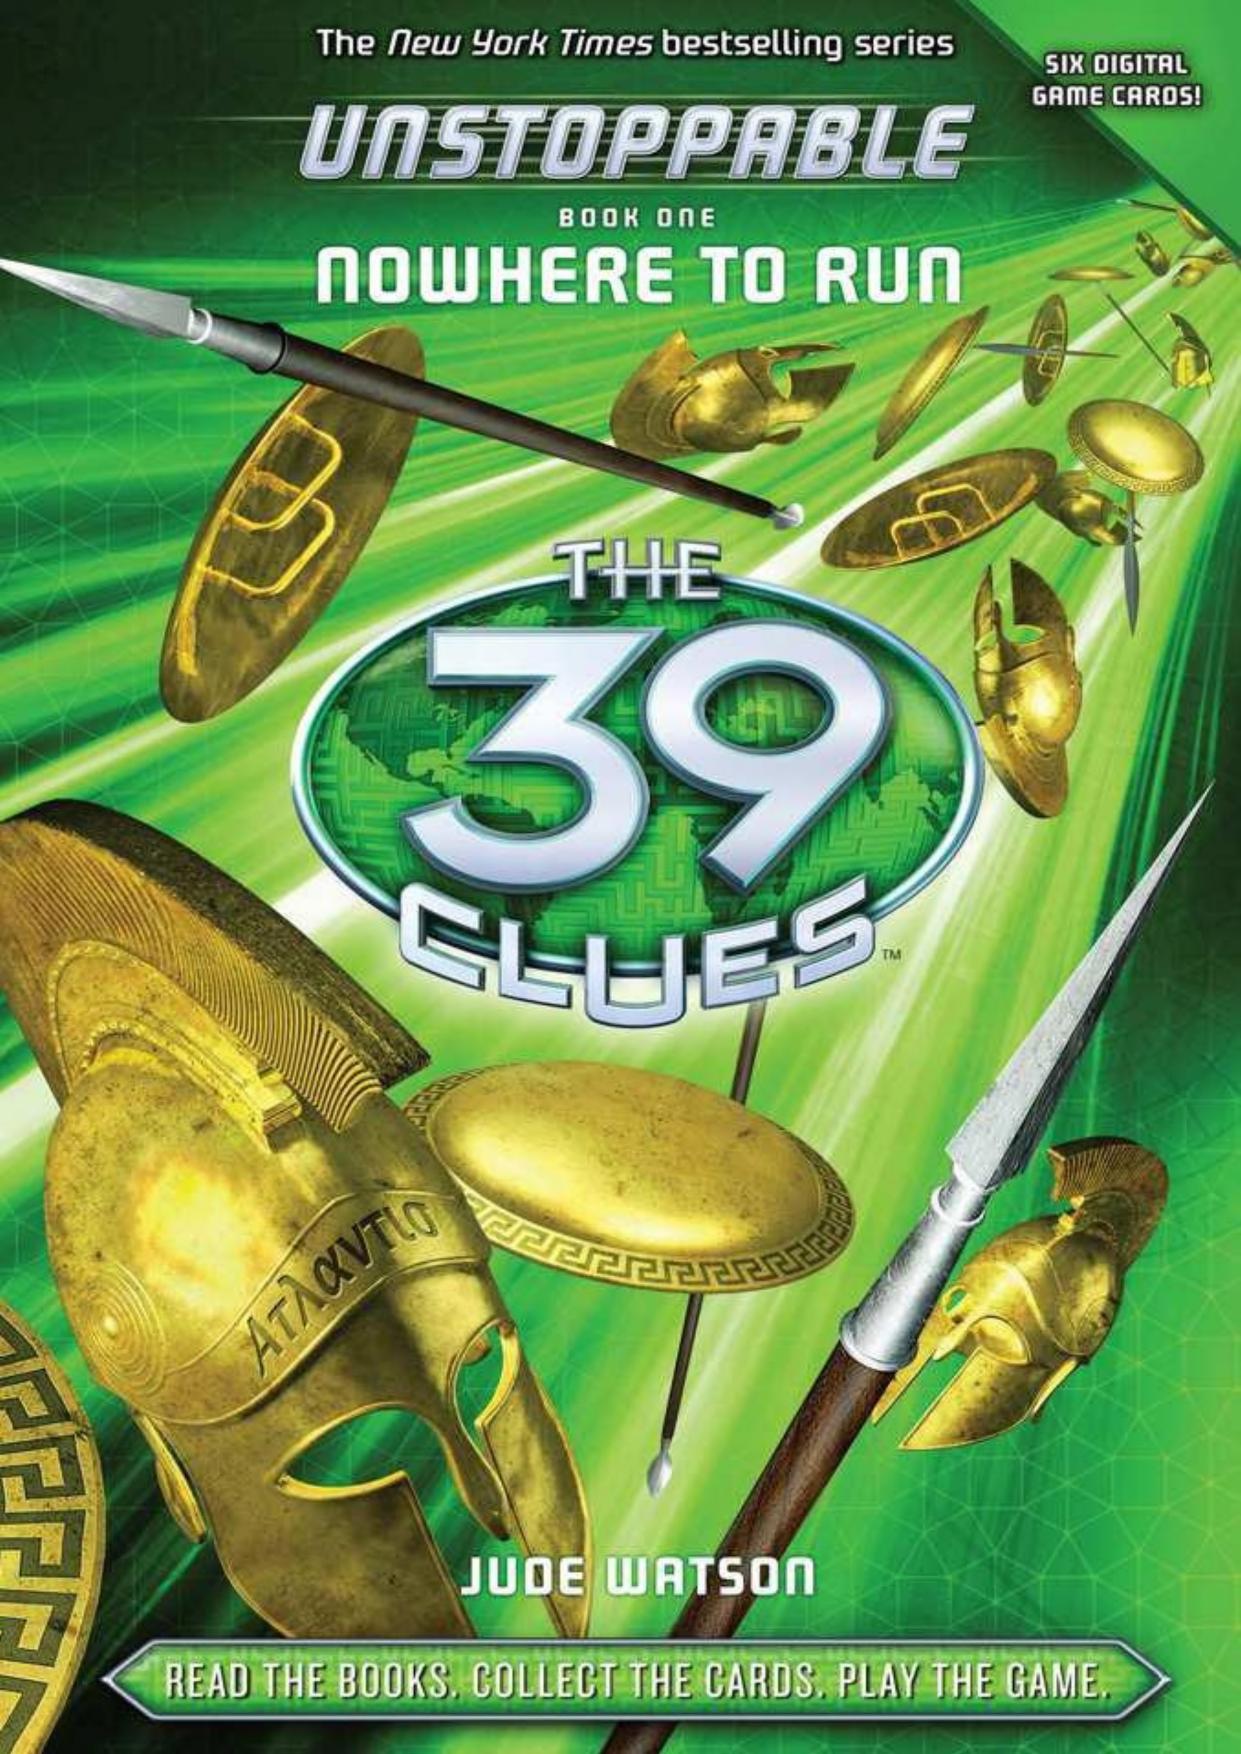 39 clues book 11 pdf free download download nvidia drivers for windows 10